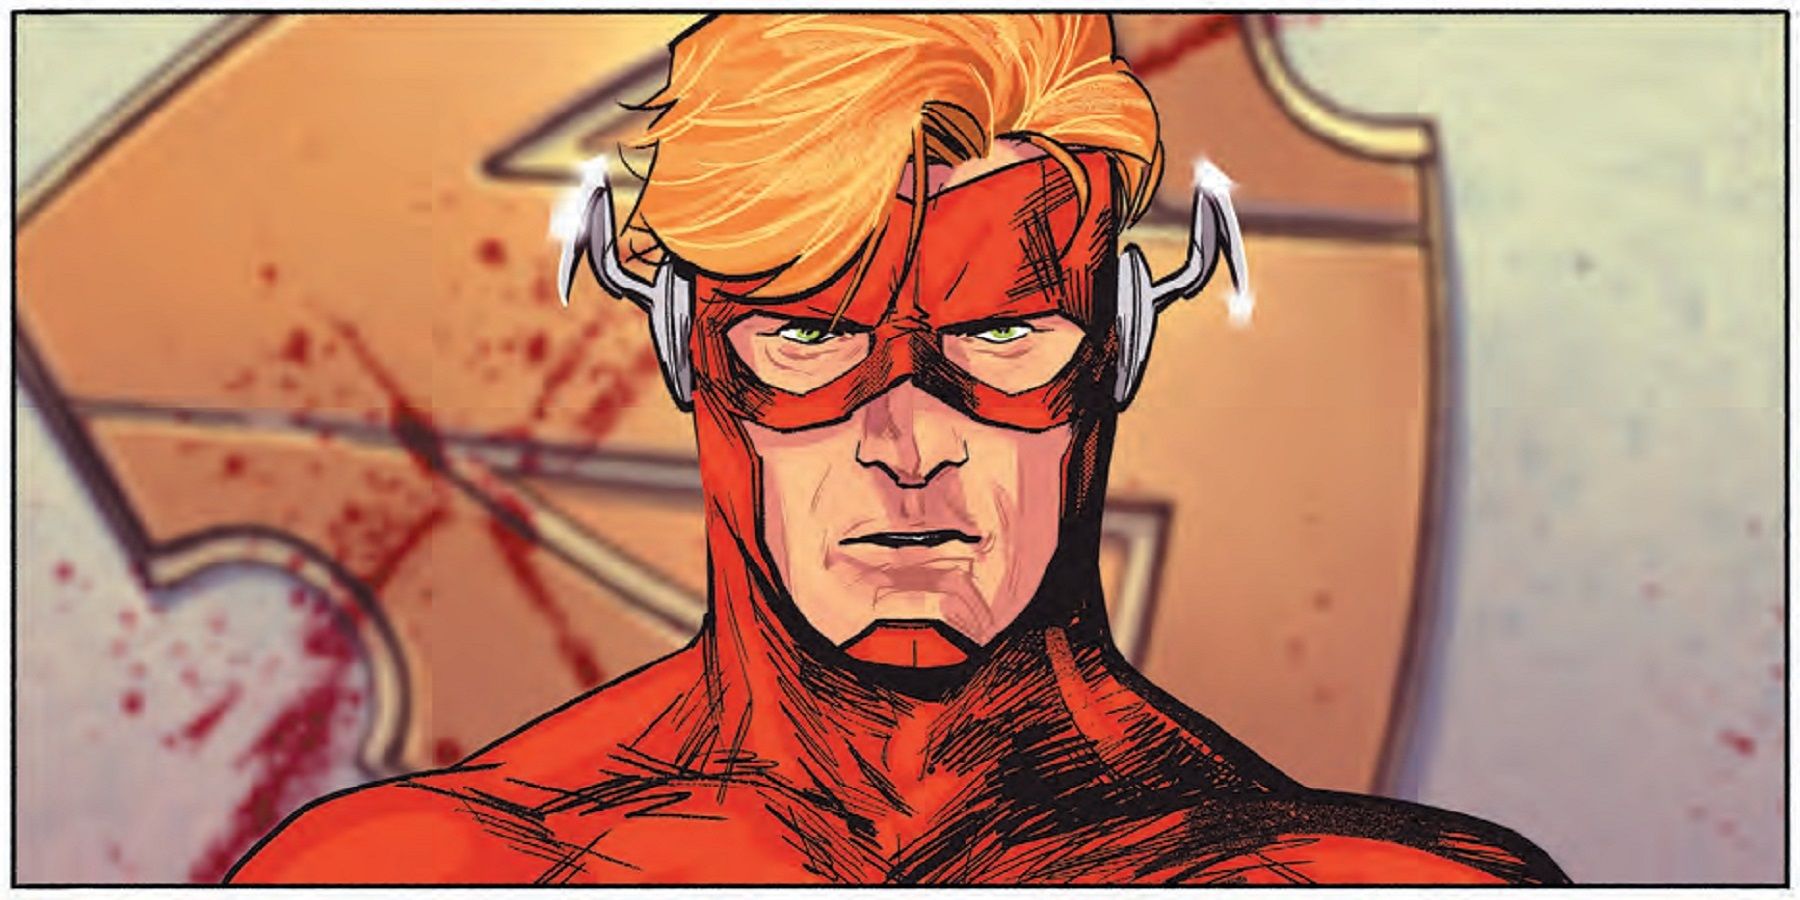 Wally West standing in front of a bloody emblem